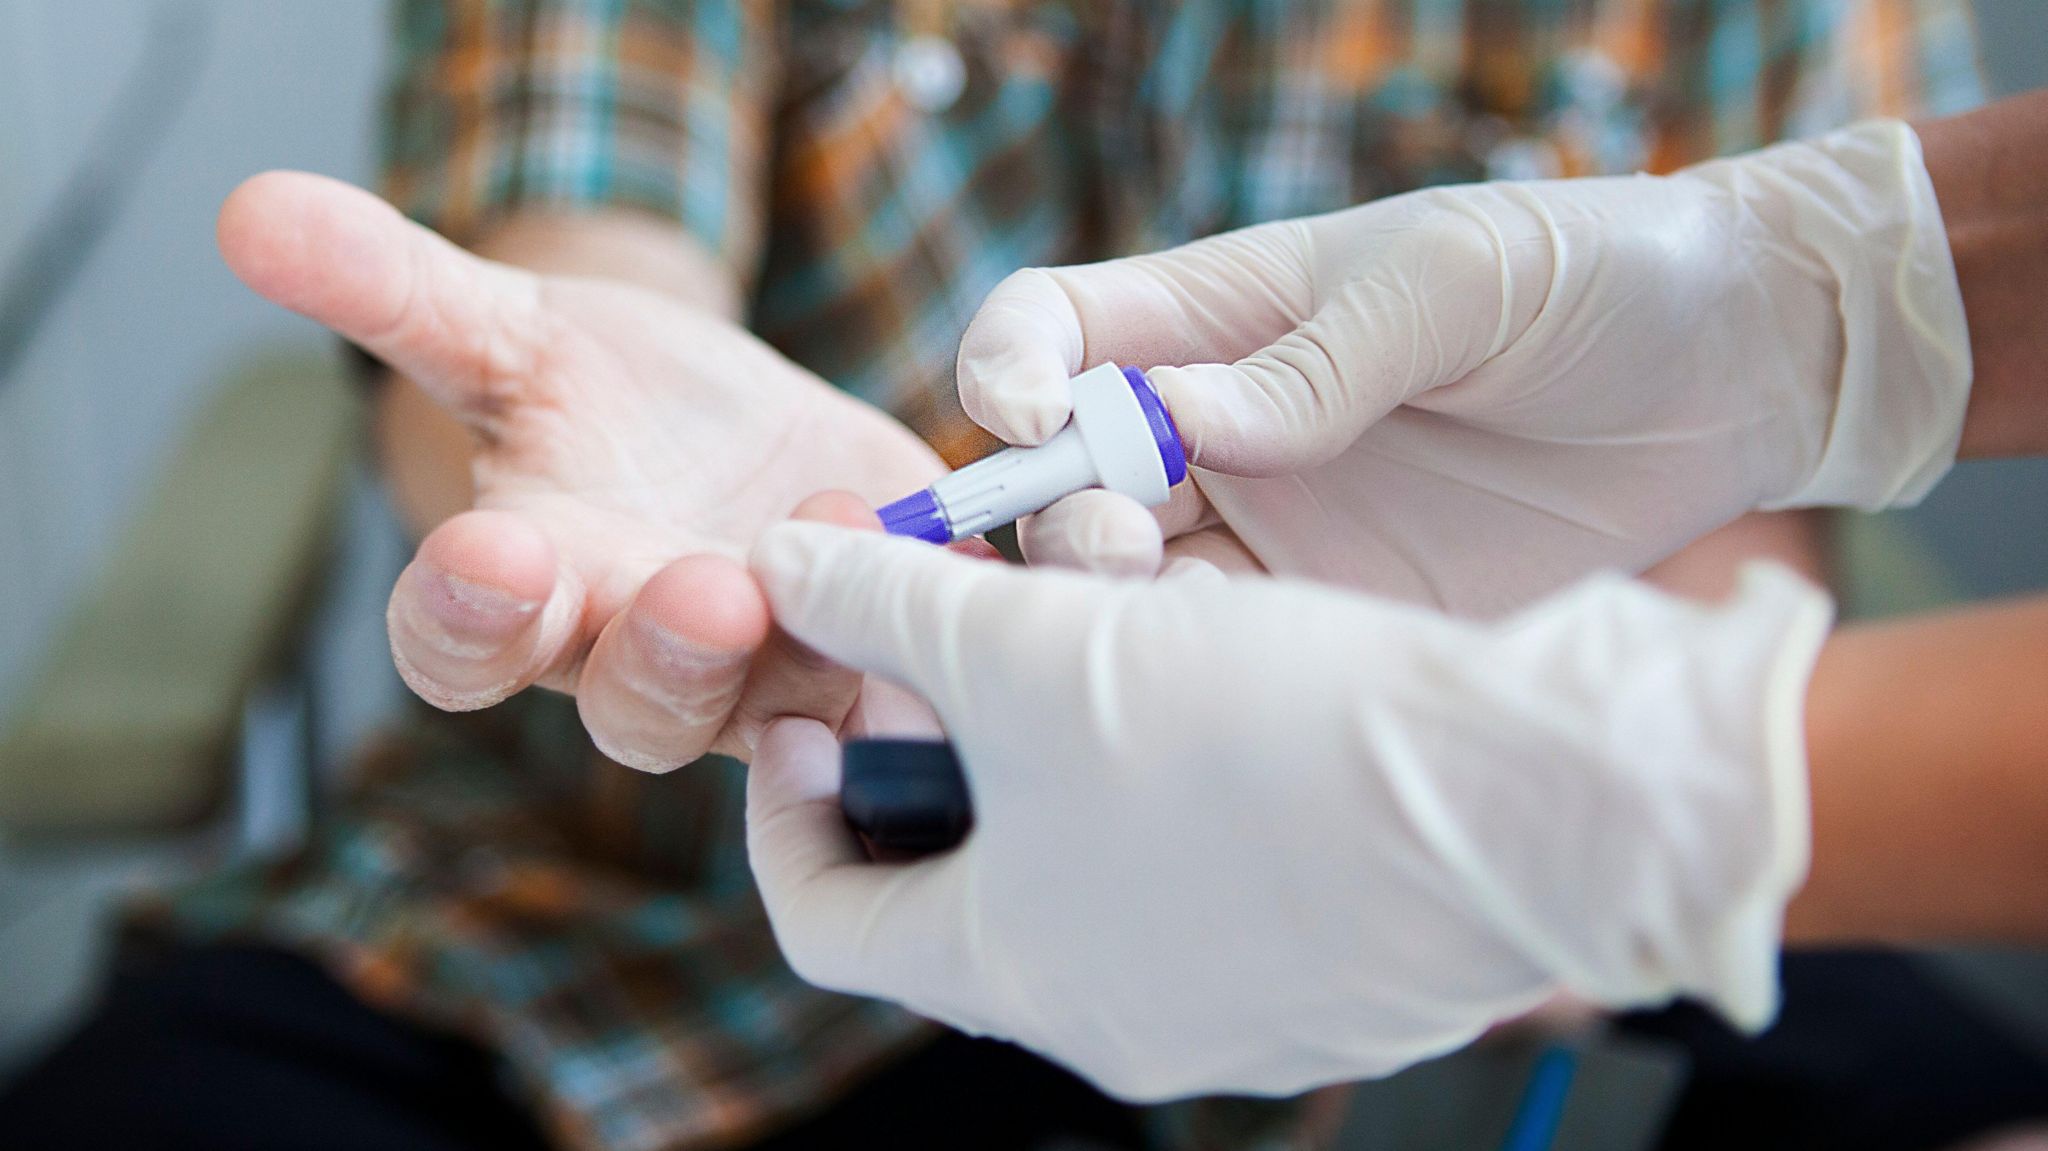 Image of a doctor performing a finger prick test on a patient